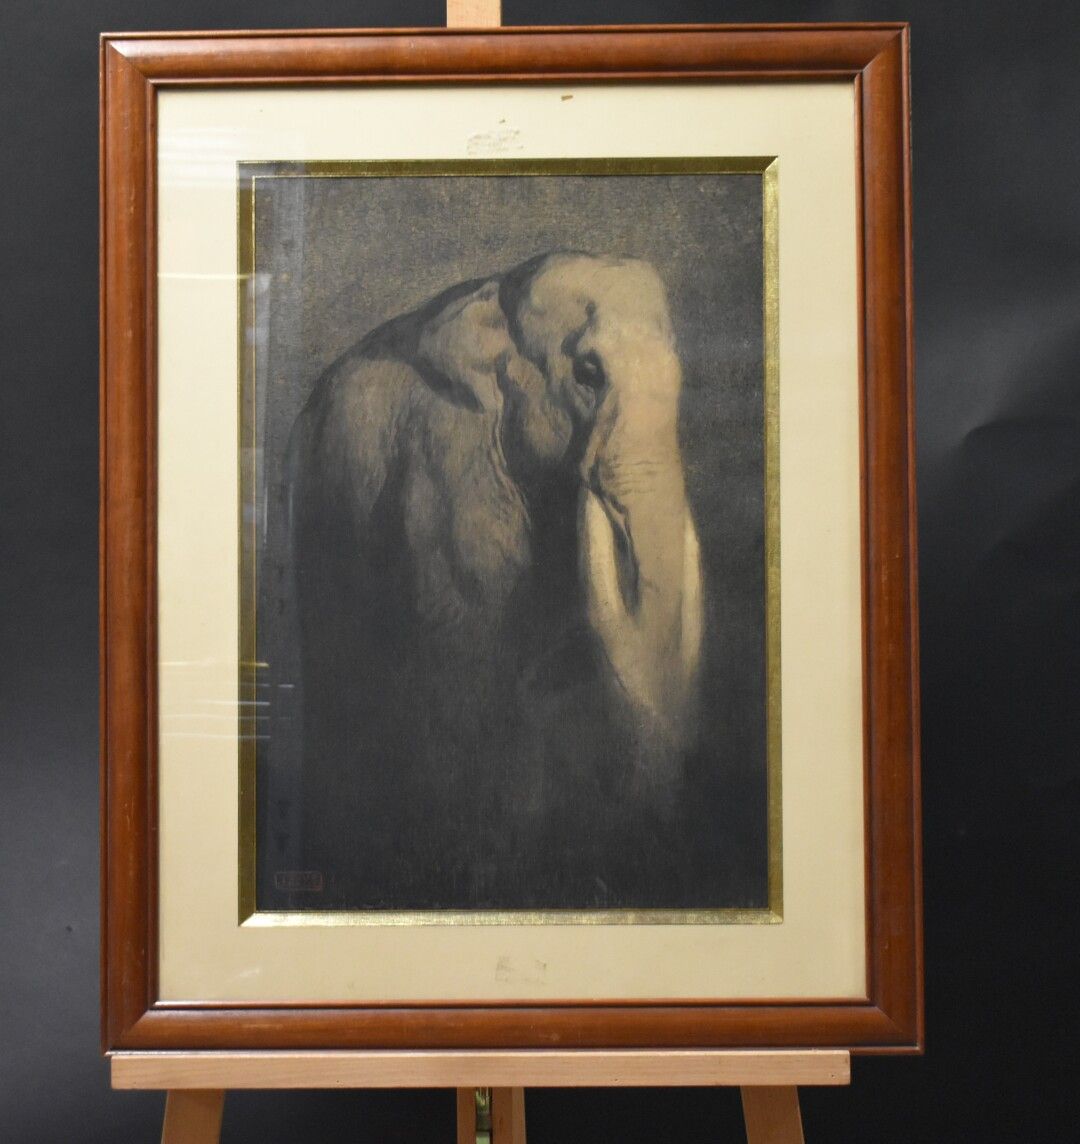 Null Paul JOUVE (1878-1973)

Elephant in the light

Charcoal drawing signed lowe&hellip;